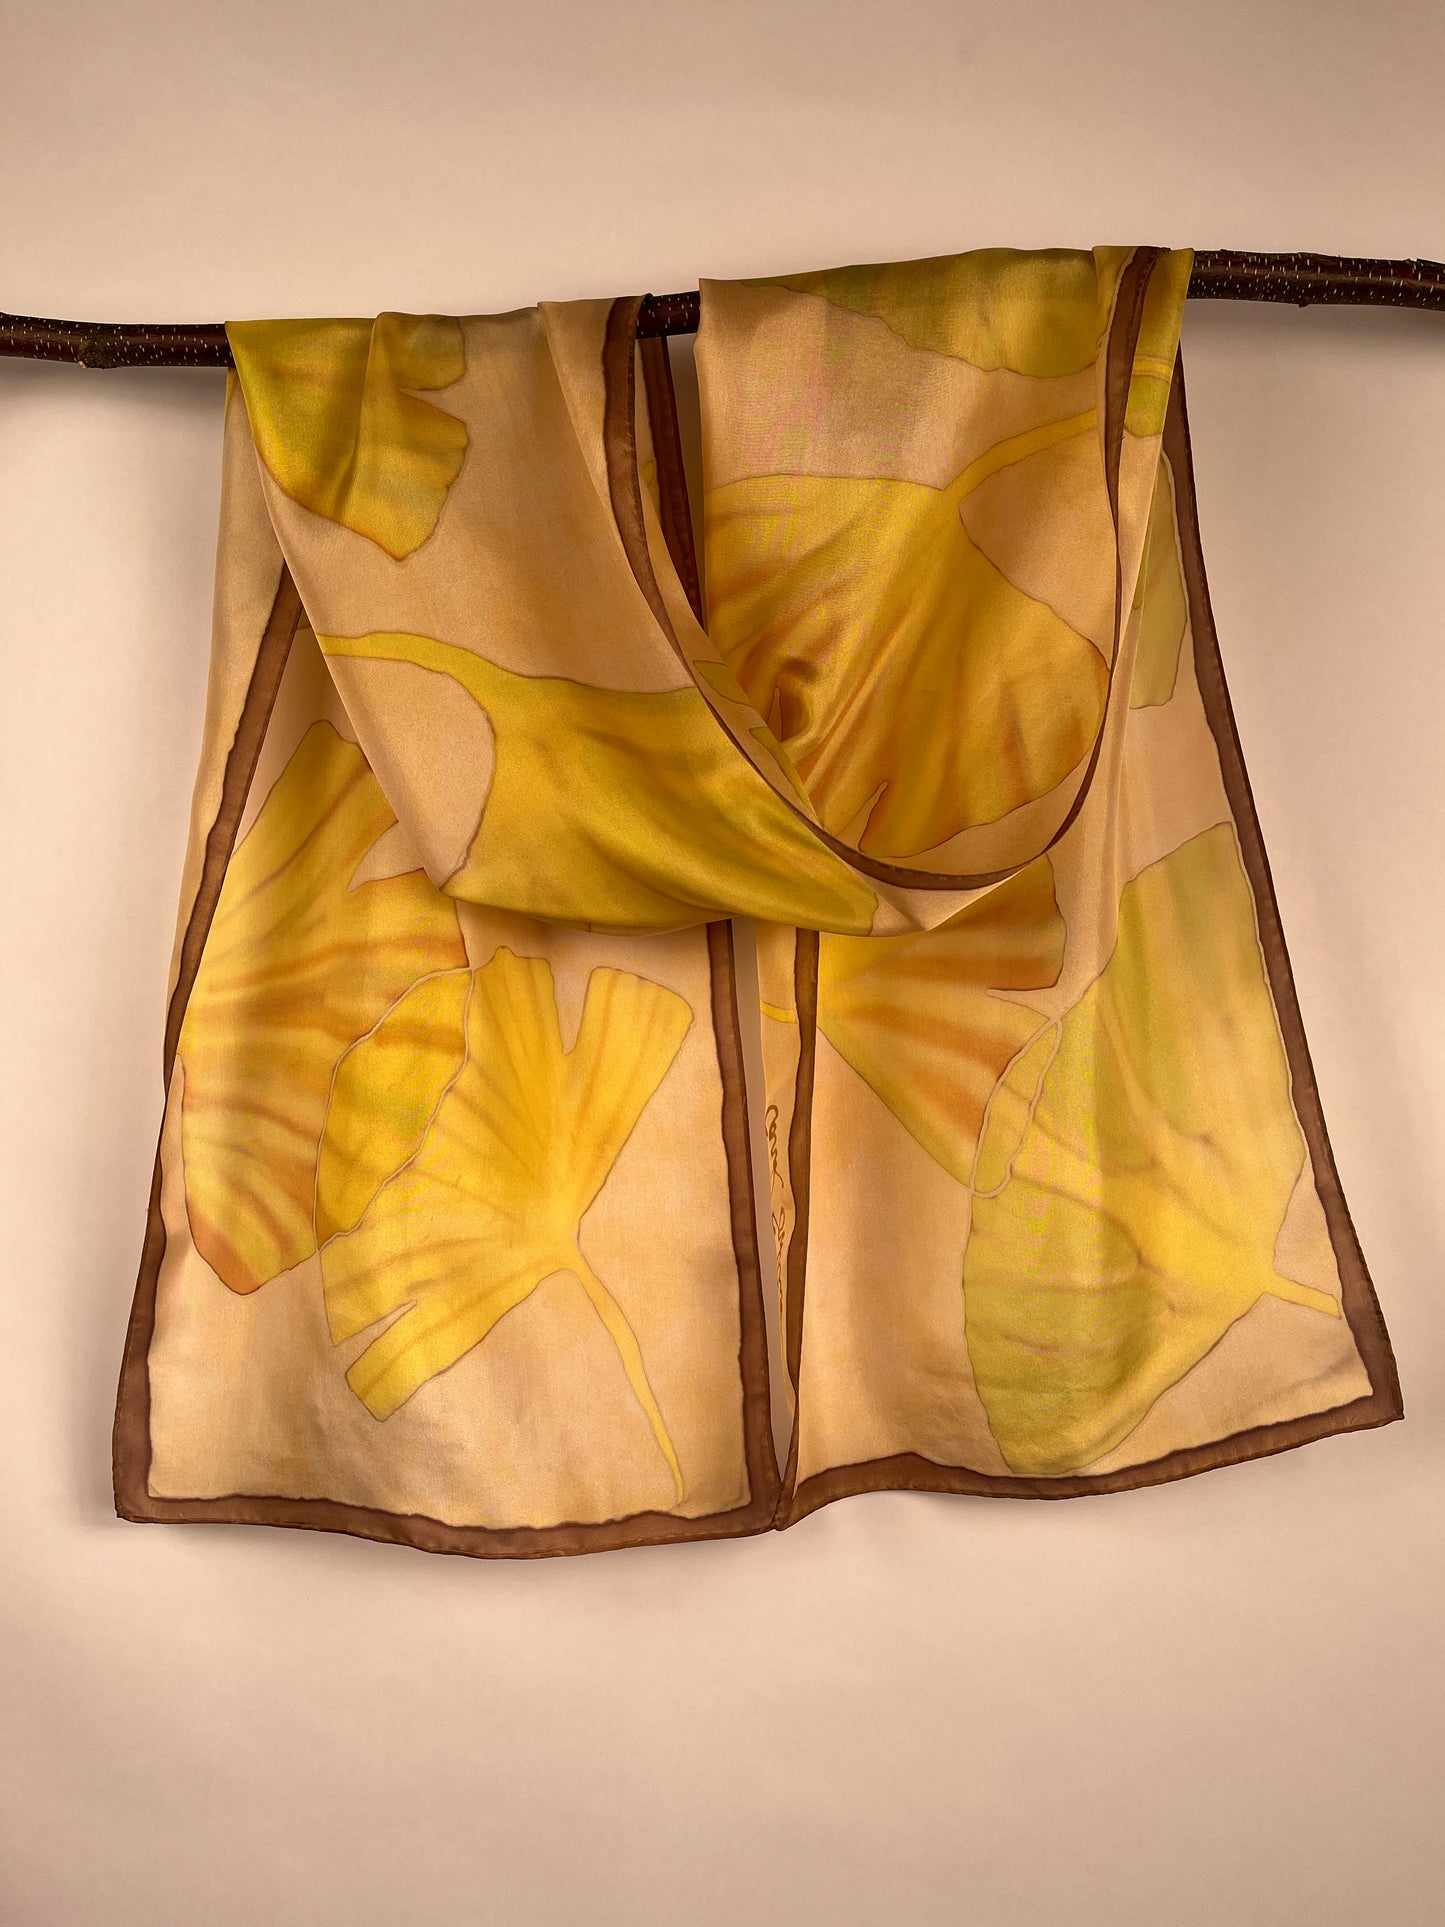 “Great Golden Gingko" - Hand-dyed Silk Scarf - $125